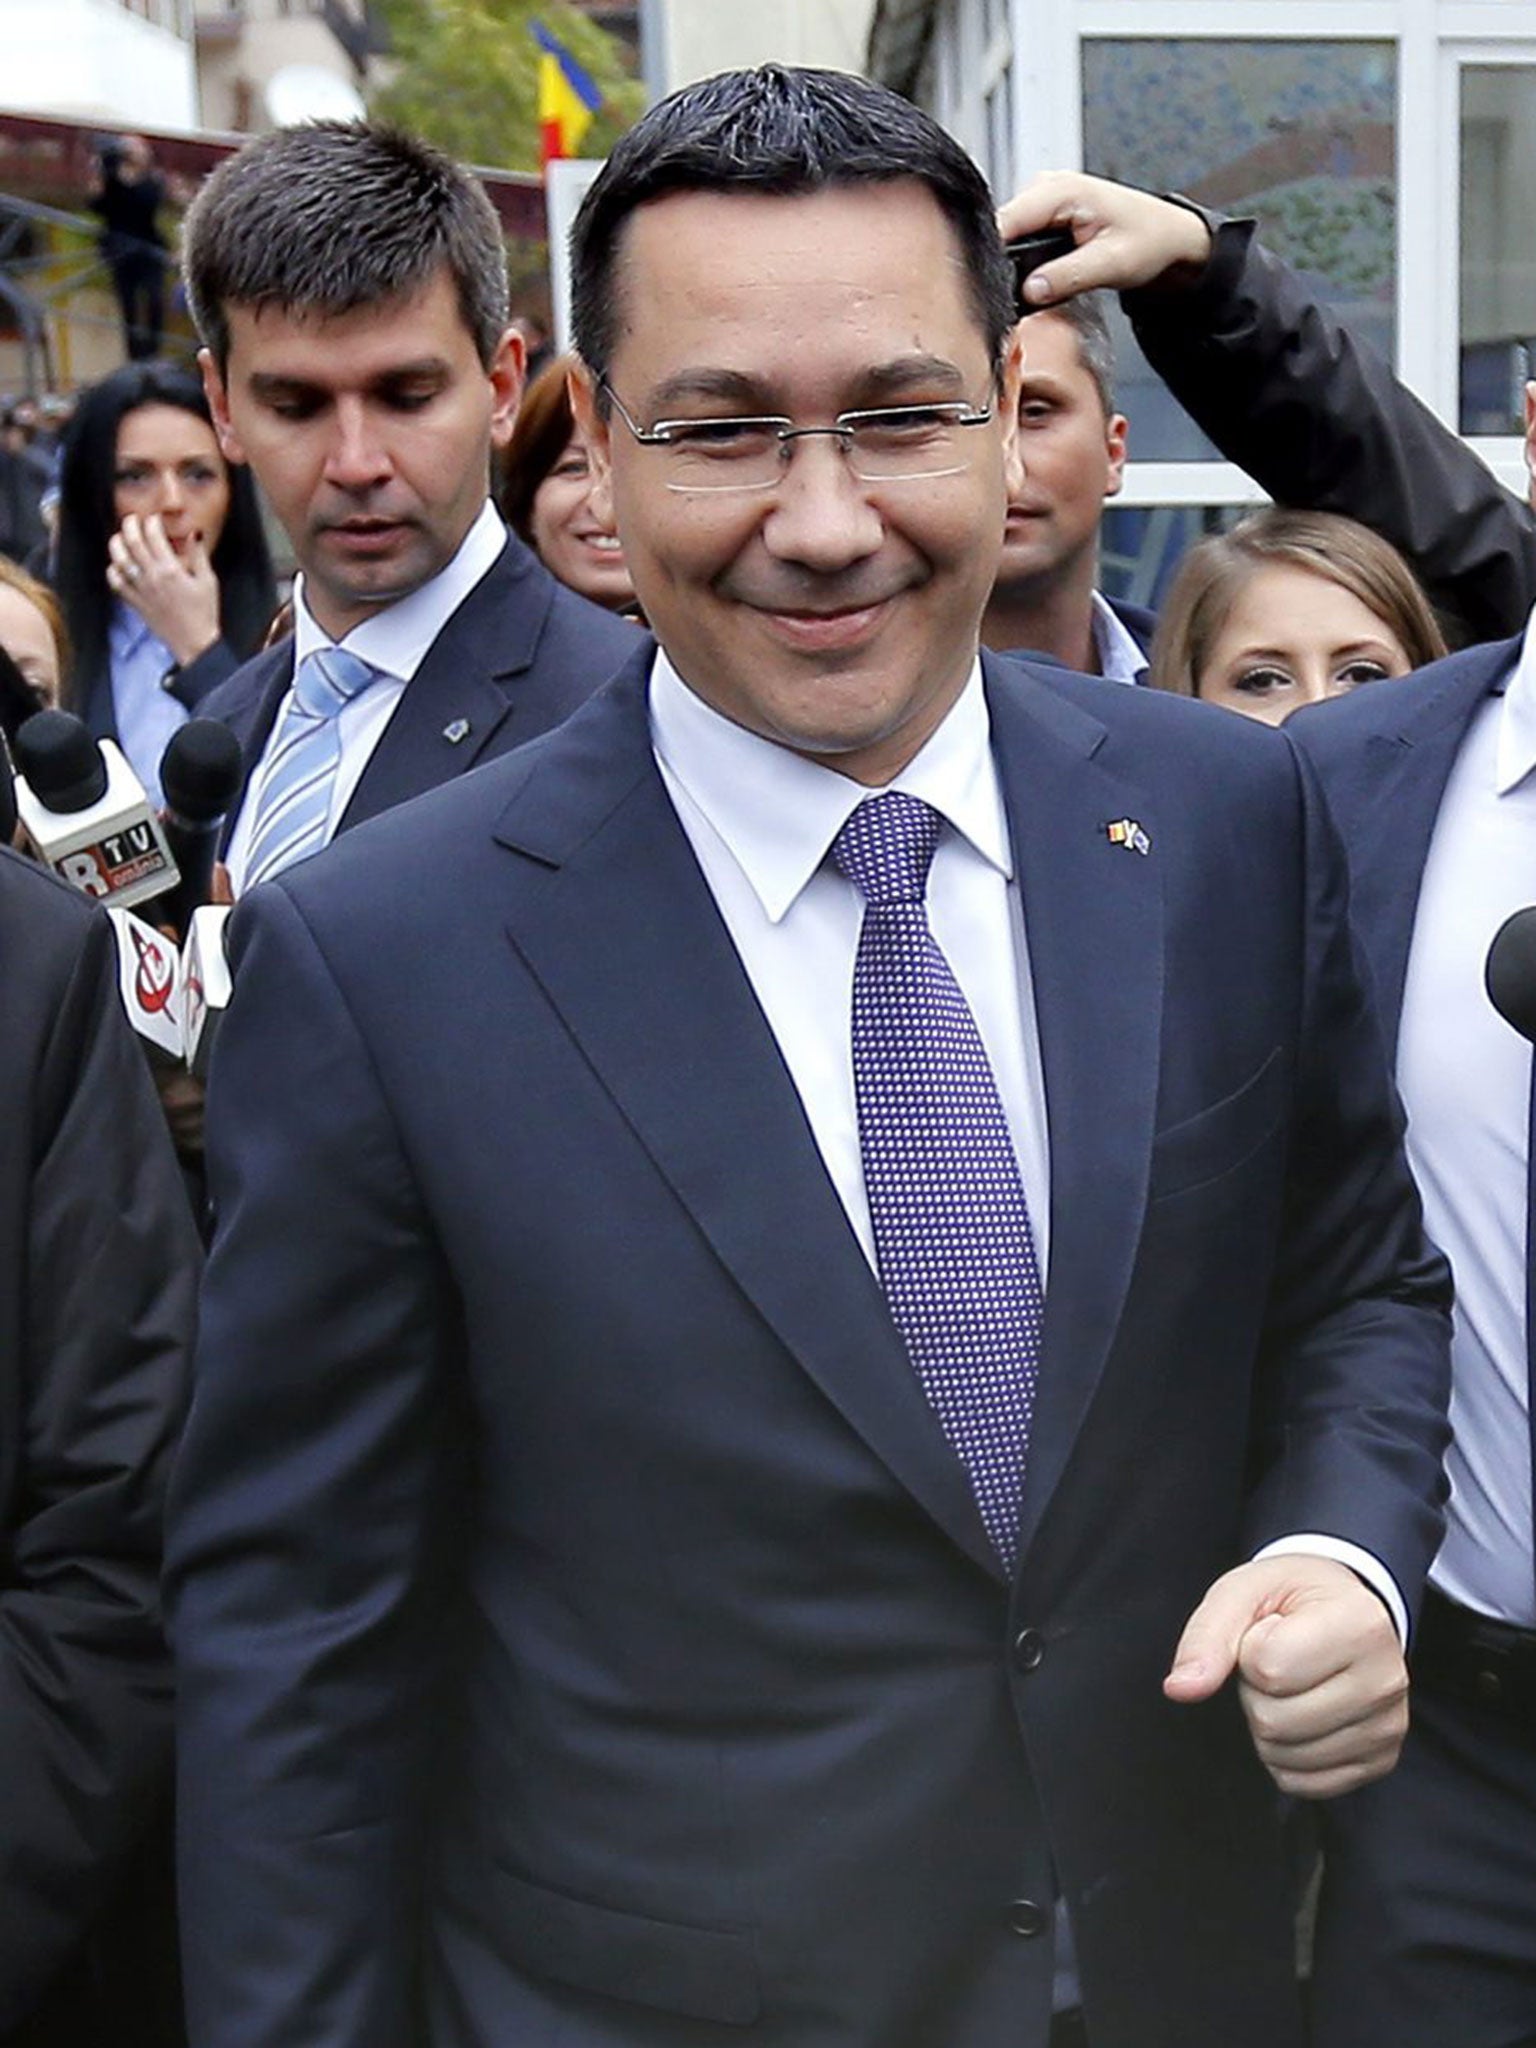 Victor Ponta, 42 and a former amateur rally driver, says he will cut taxes and raise penions